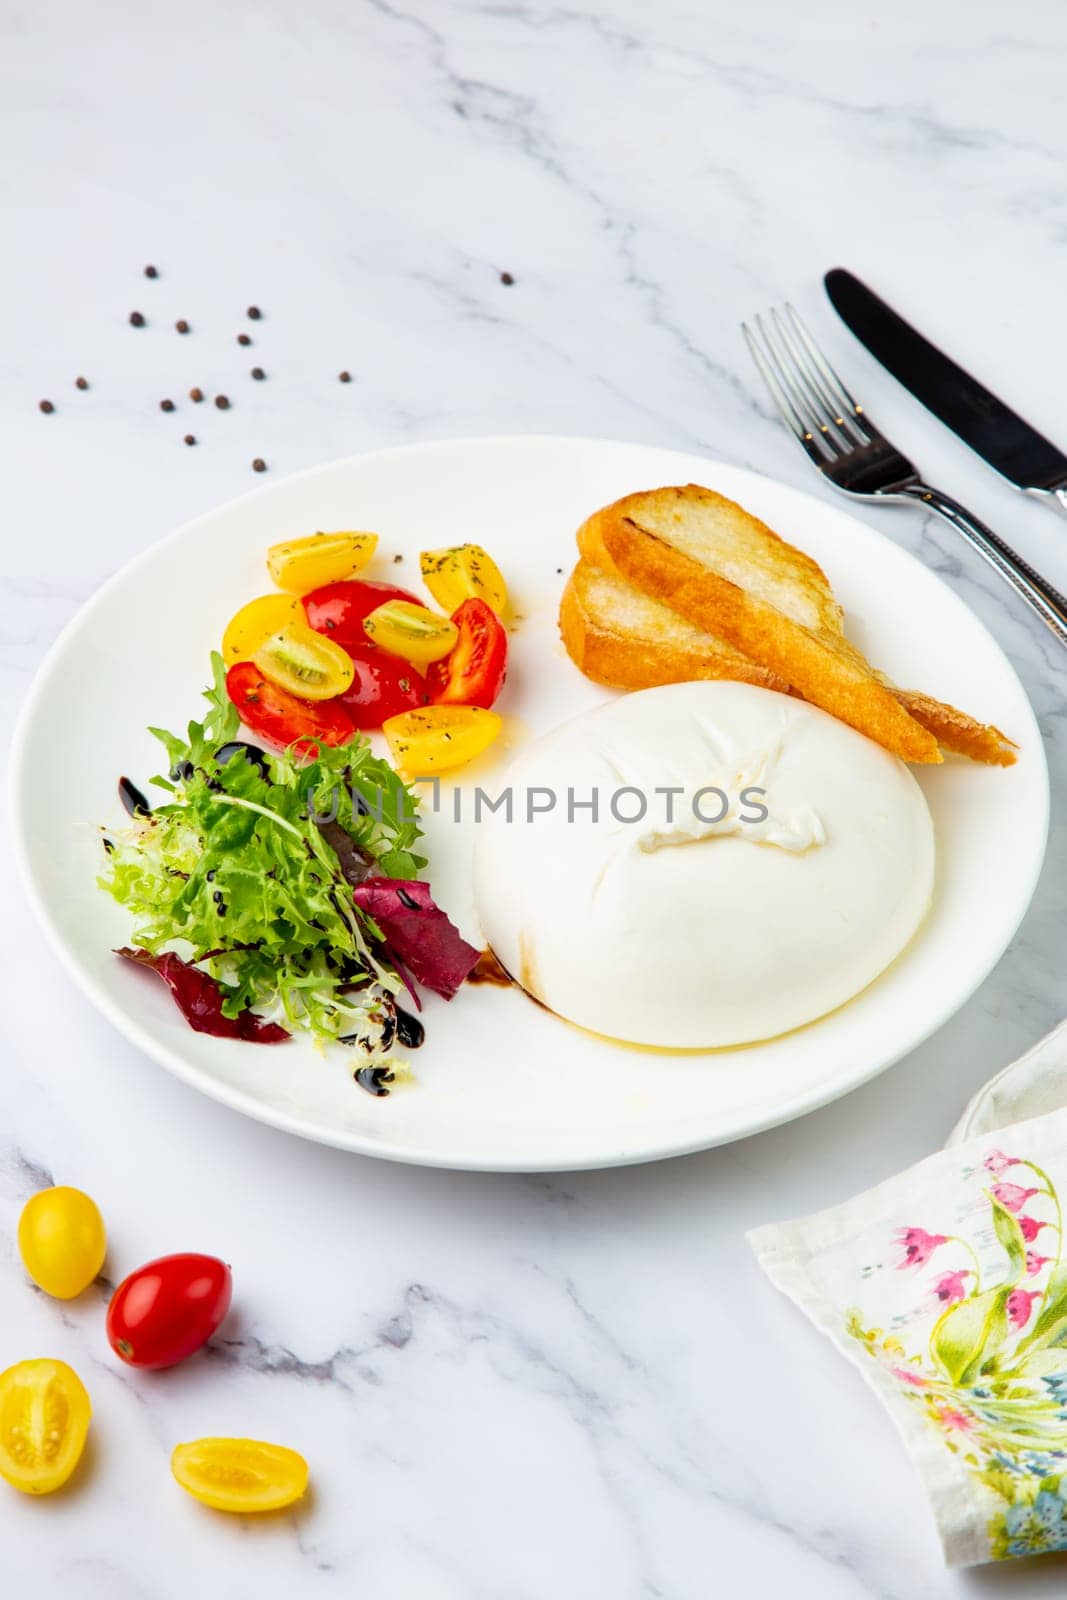 mozzarella with spinach, cherry tomatoes, wild berries and bread